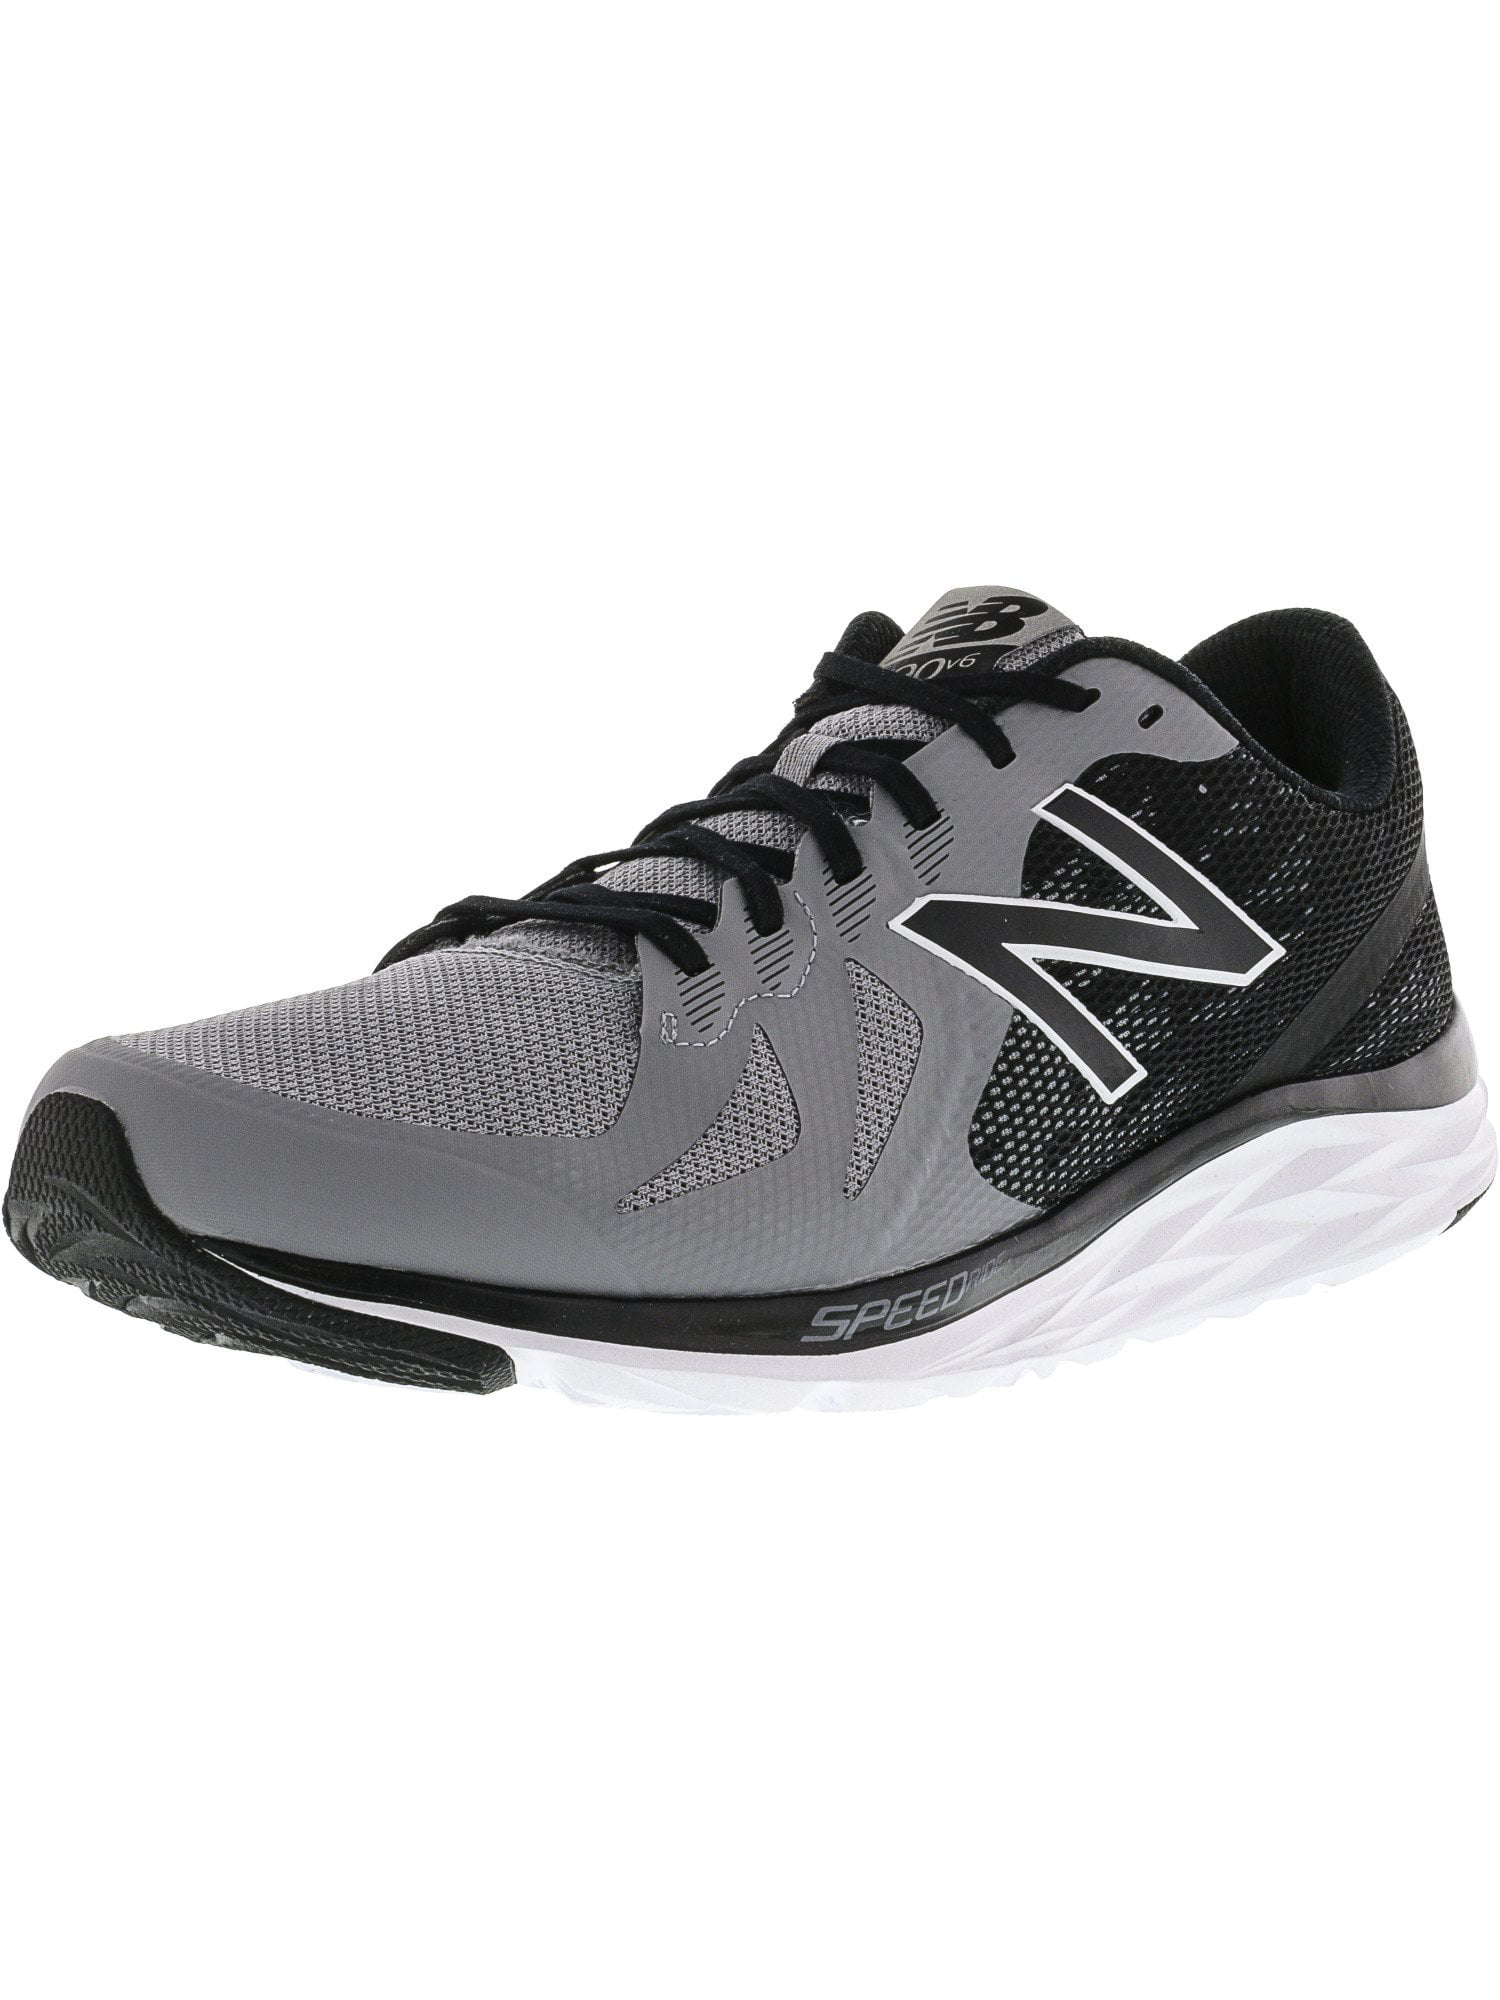 M790 Ls6 Ankle-High Running Shoe - 9WW 